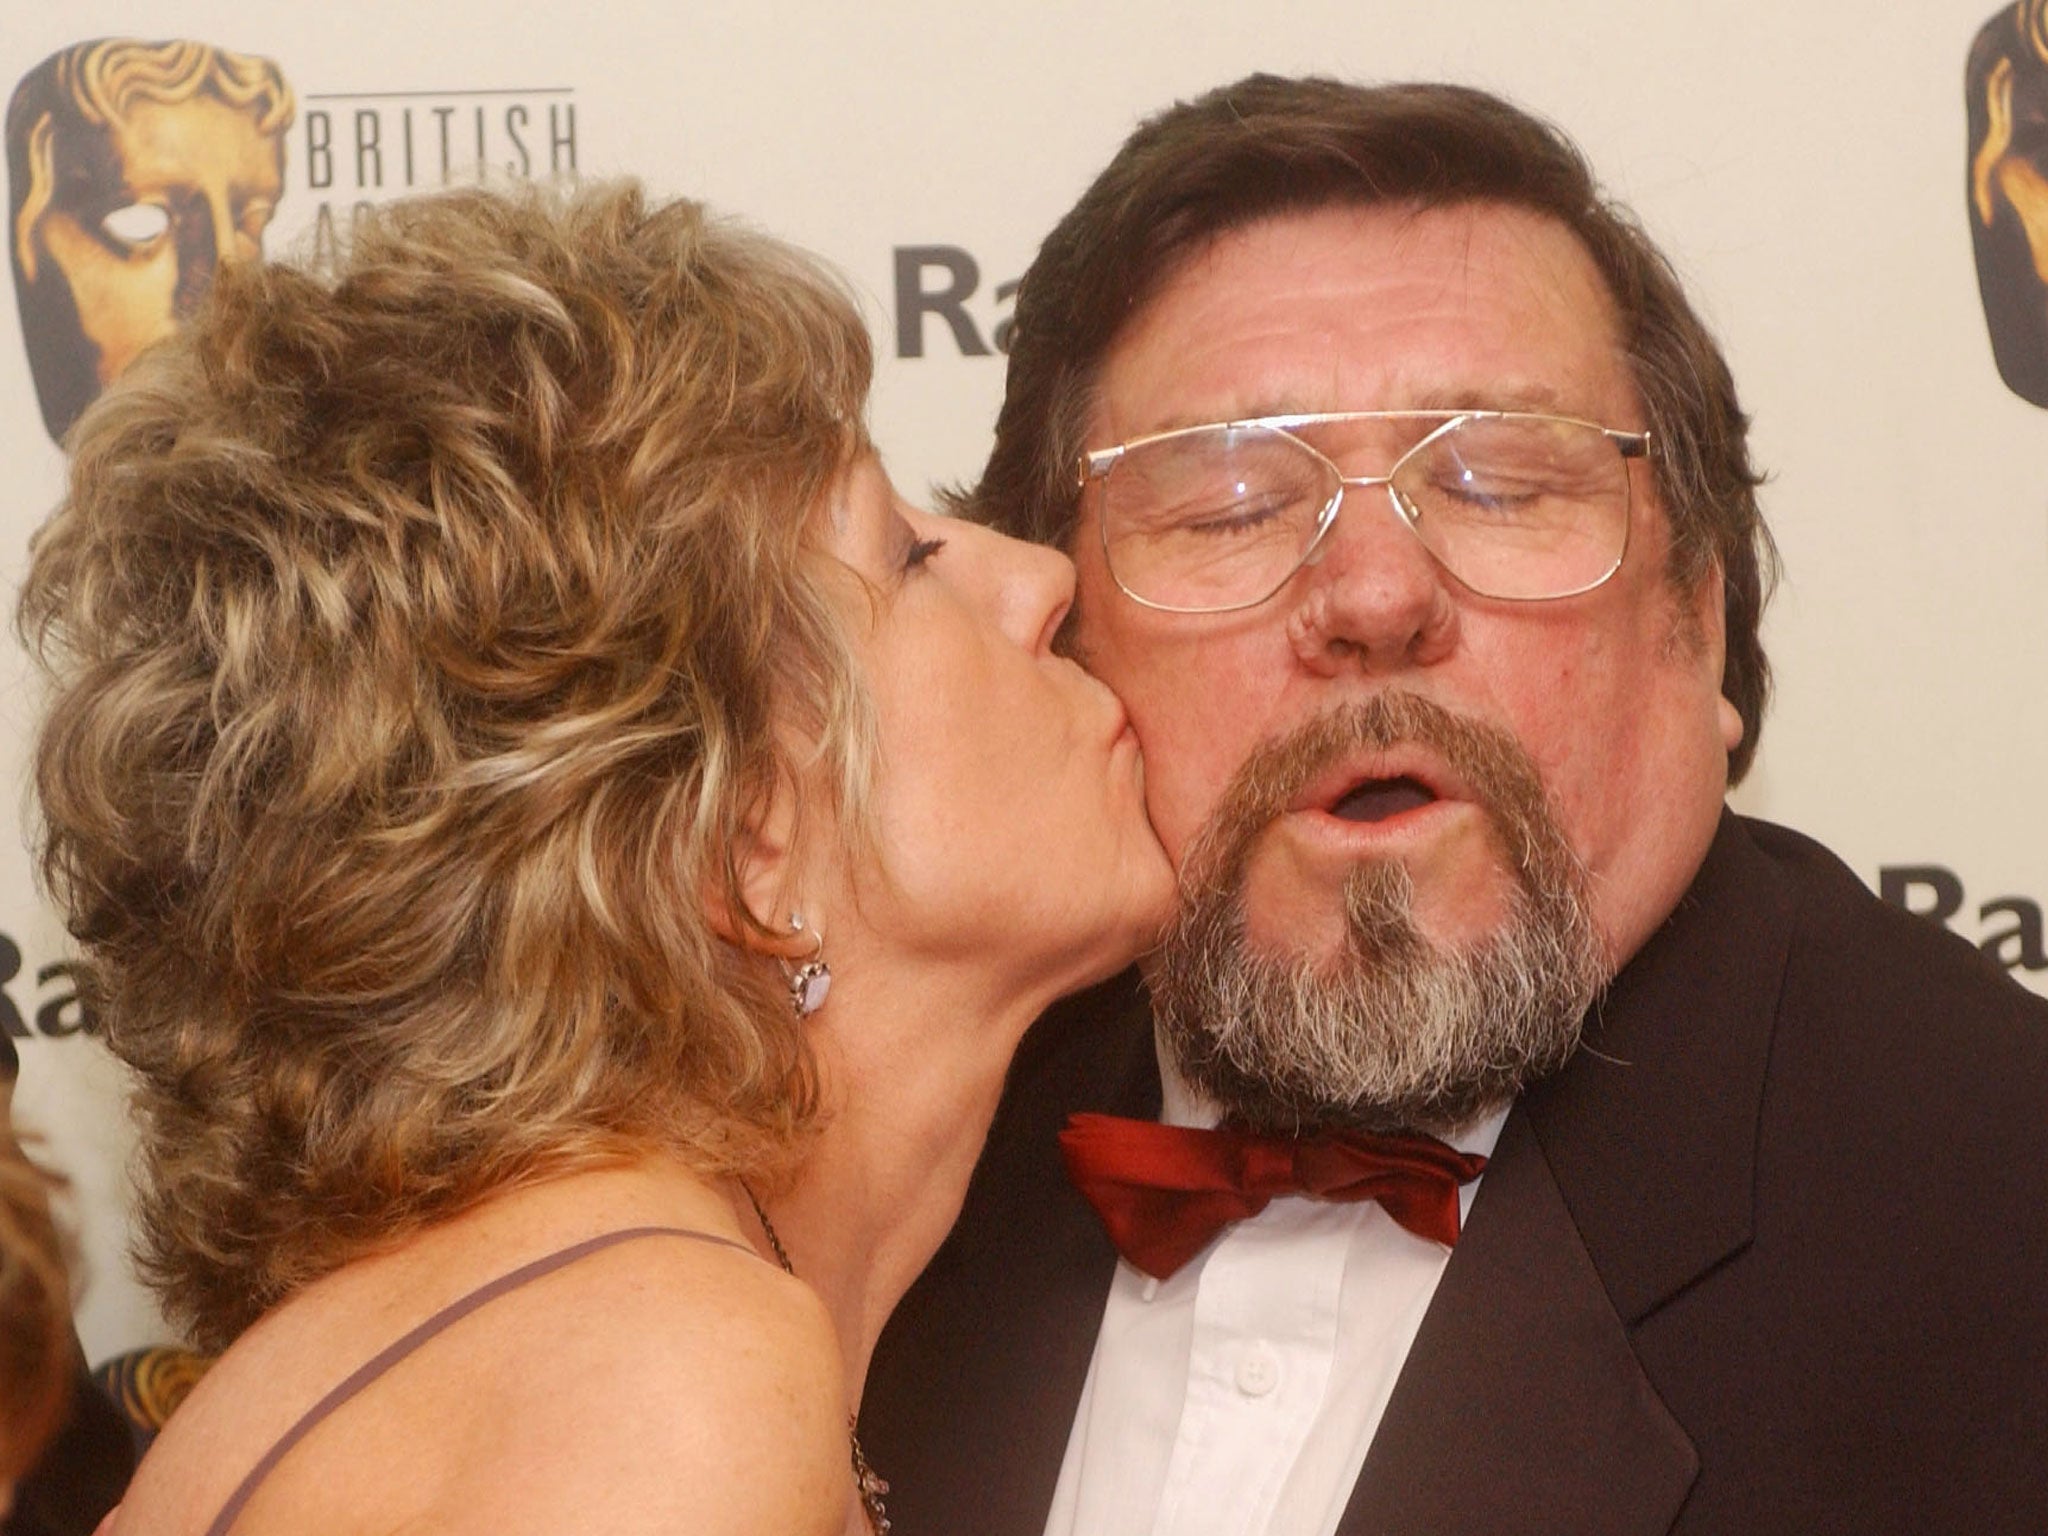 Actress Sue Nicholls kisses actor Ricky Tomlinson after winning the award for Best Continuing Drama in the pressroom following the 'The British Academy Television Awards' at the Grosvenor House Hotel on April 18, 2004 in London.